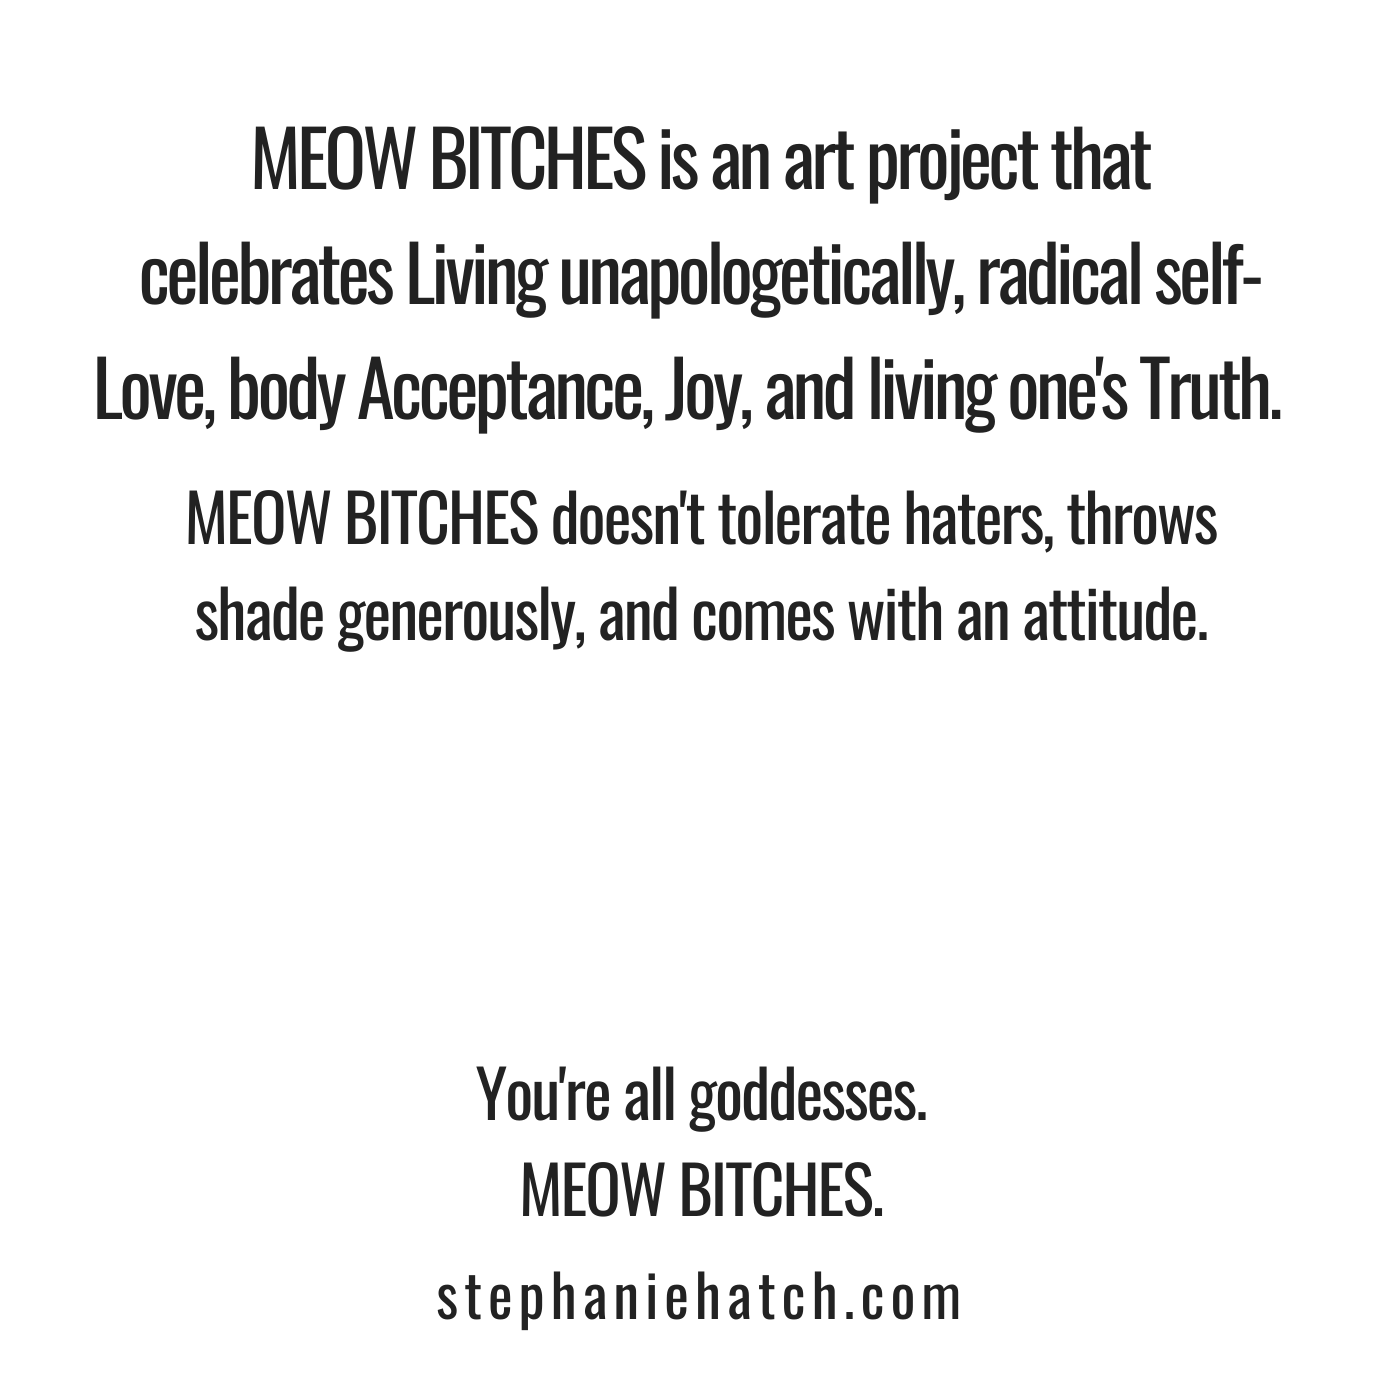 Copy of MEOW BITCHES is a movement of Living Unapologetically, radical self-love, body acceptance, Joy, and living one's truth. MEOW BITCHES doesn't tolerate haters, throws shade generously, and comes with an a.png